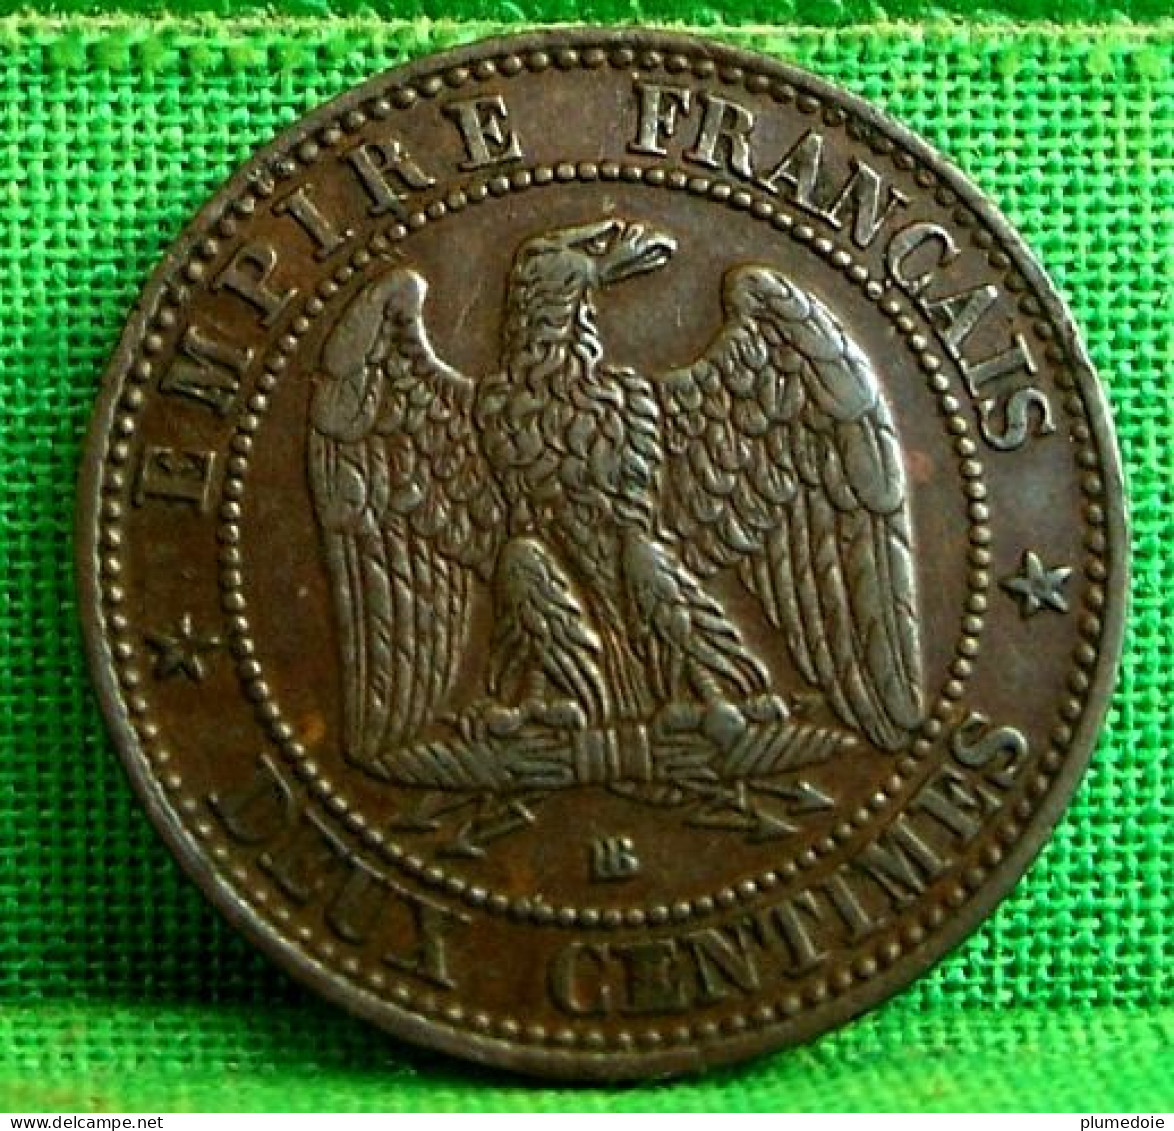 MONNAIE NAPOLEON III, UN CENTIME 1854 BB STRASBOURG  ,   Old FRANCE COIN - 1 Centime